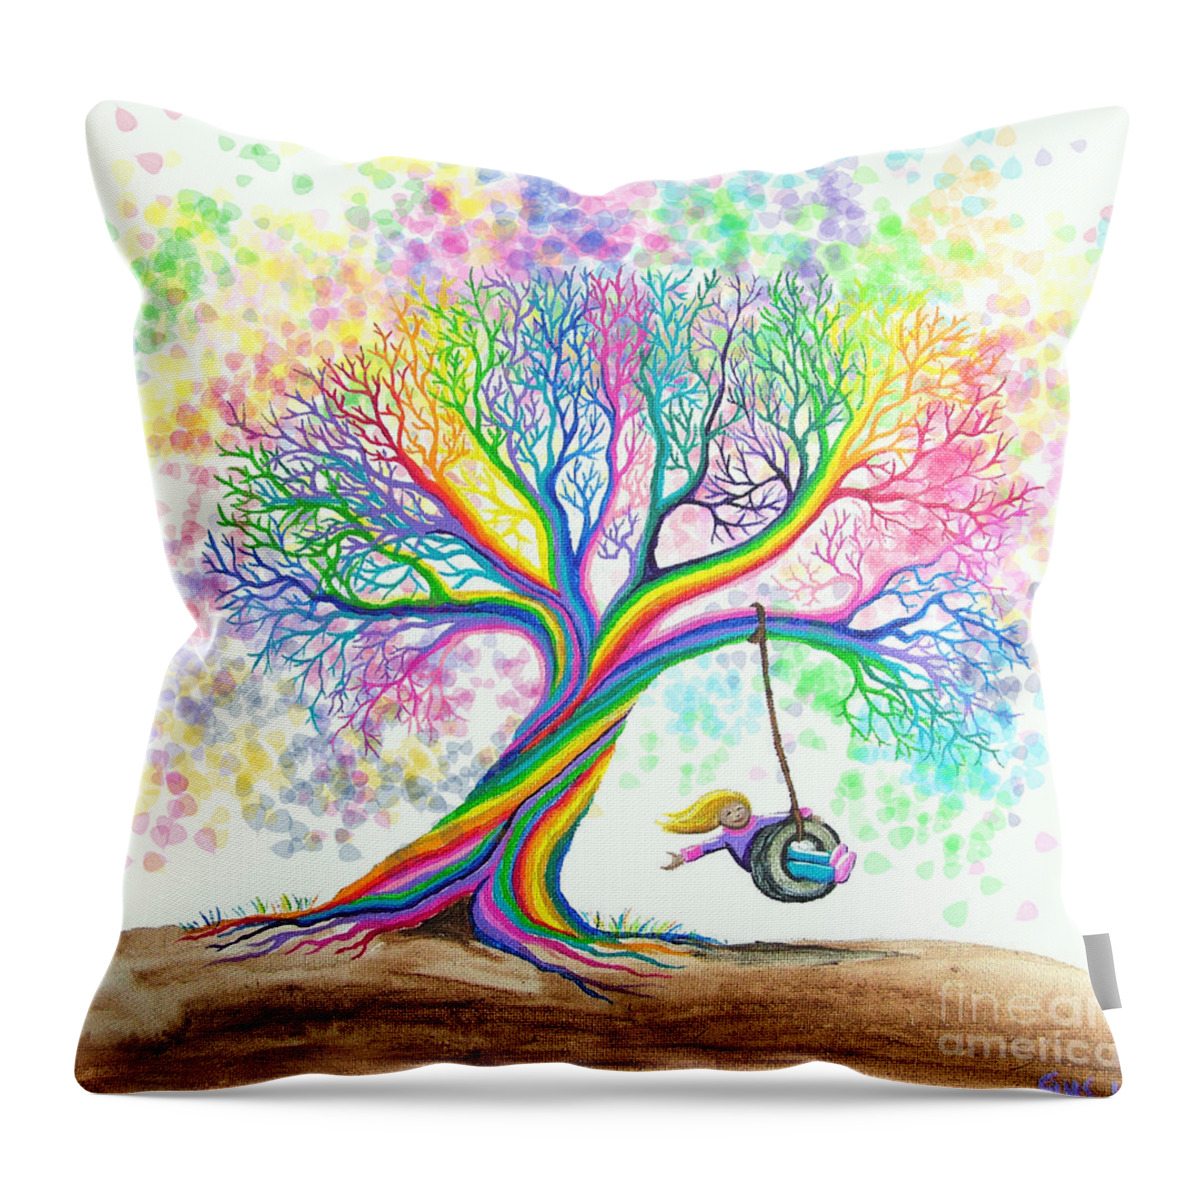 Colorful Art Throw Pillow featuring the painting Still More Rainbow Tree Dreams by Nick Gustafson